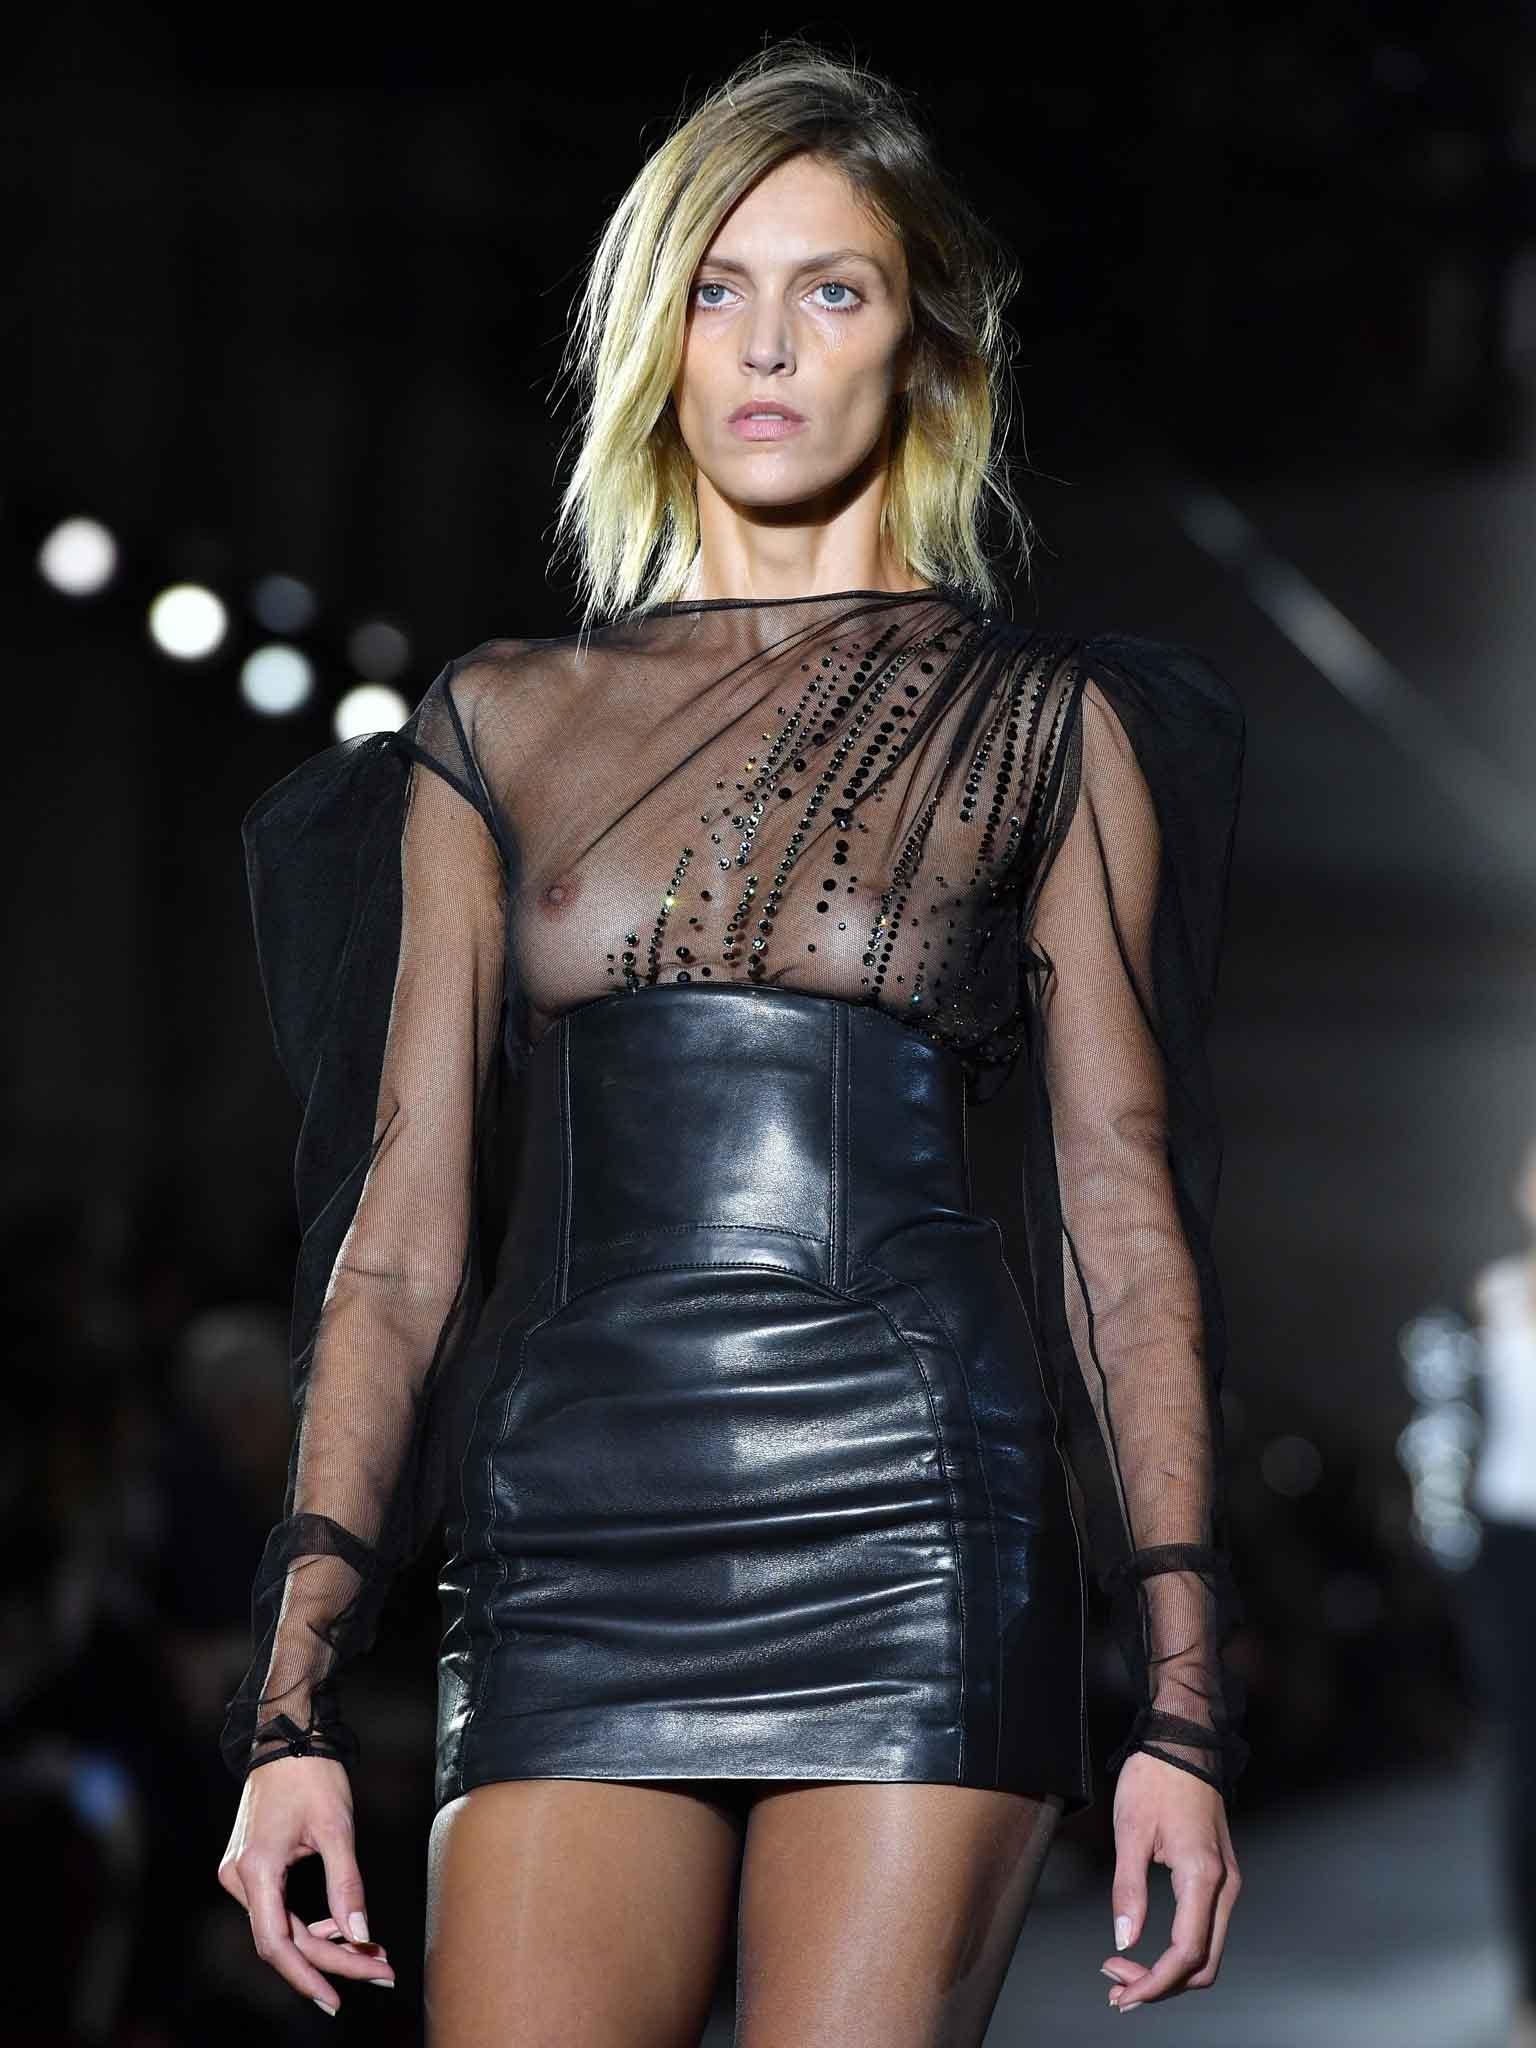 Saint Laurent unveils 'nip slip' dress – a glittery mono-boob outfit for  the brave, The Independent